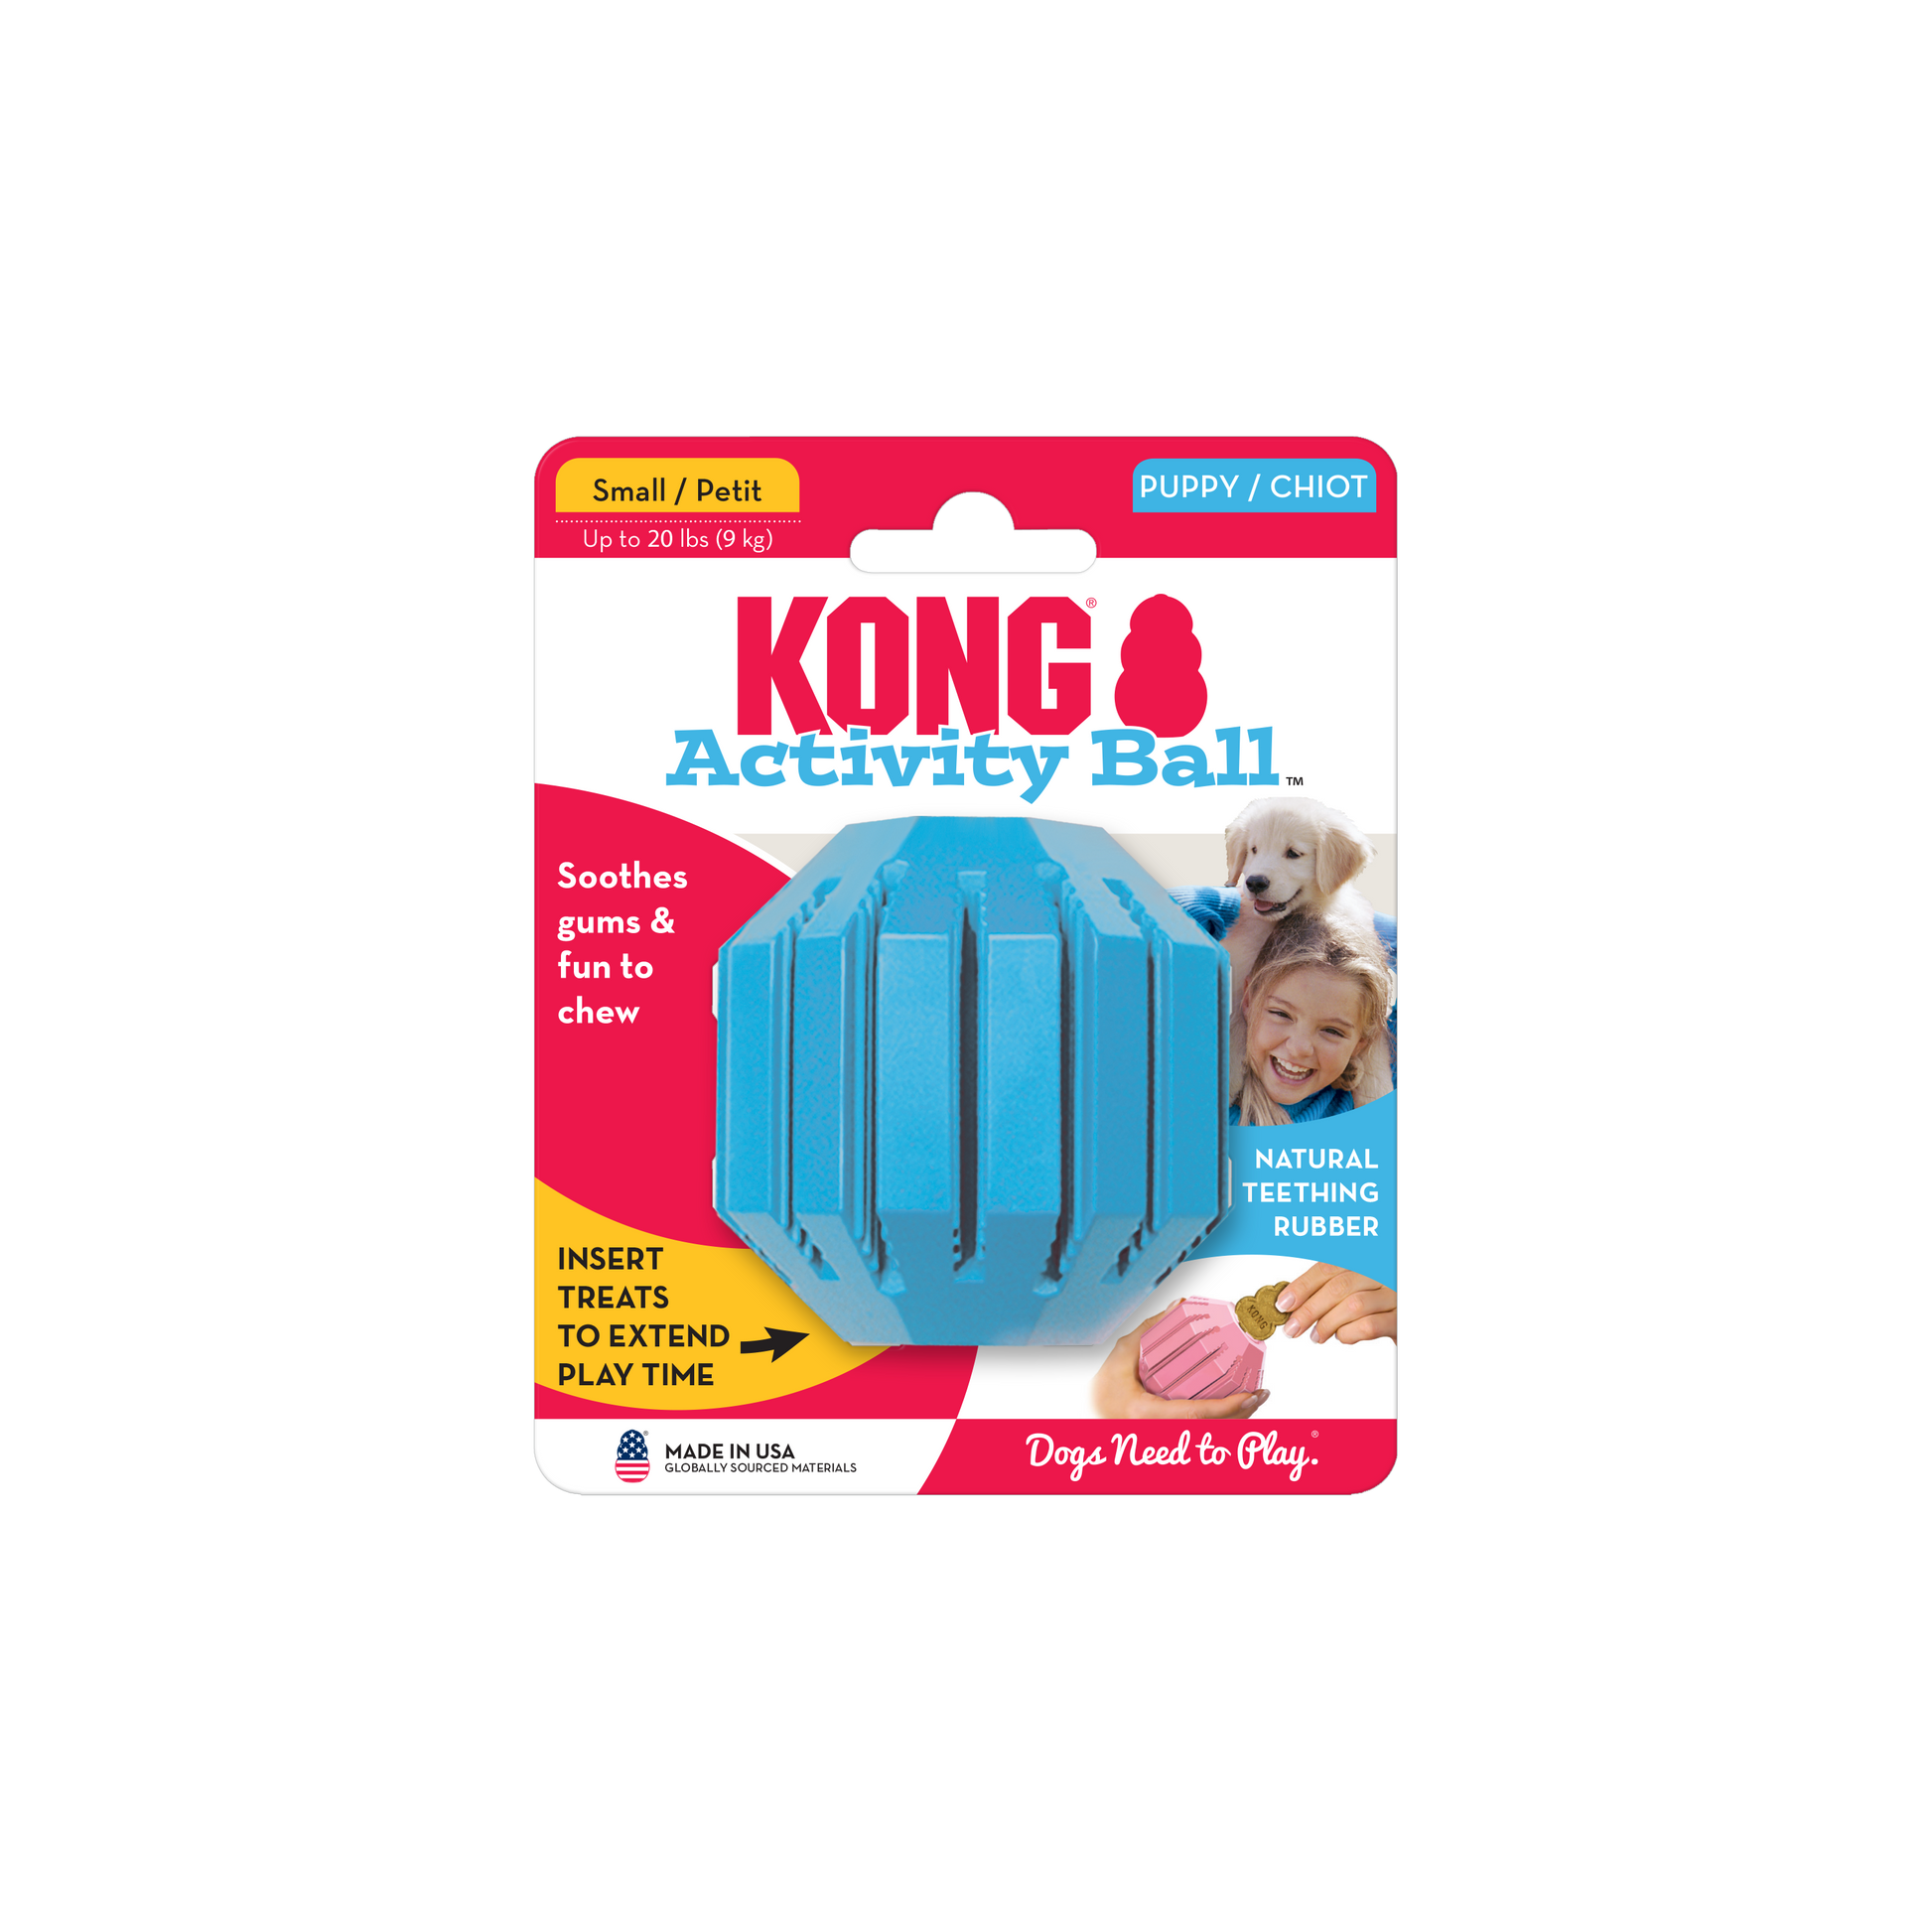 Your Whole Dog's SALE: KONG Puppy Activity Ball for dogs.